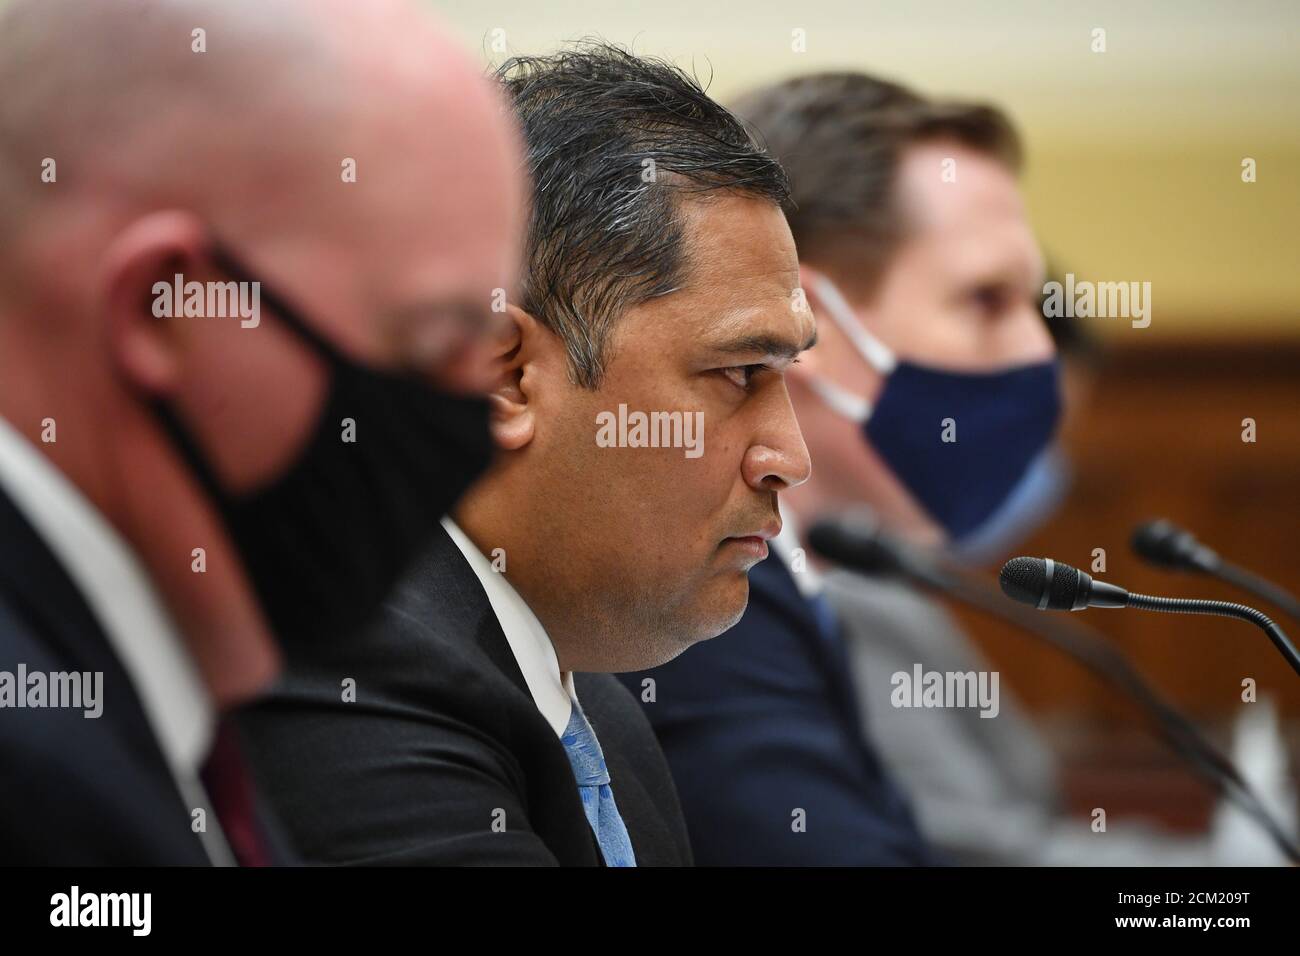 R. Clarke Cooper (L), Assistant Secretary of State for Political-Military Affairs, Brian Bulatao (C), Under Secretary of State for Management, and Marik String, Acting Legal Adviser for the State Department, testify before a House Committee on Foreign Affairs hearing looking into the firing of State Department Inspector General Steven Linick, on Capitol Hill in Washington, D.C. on Wednesday, September 16, 2020.  Credit: Kevin Dietsch / Pool via CNP /MediaPunch Stock Photo